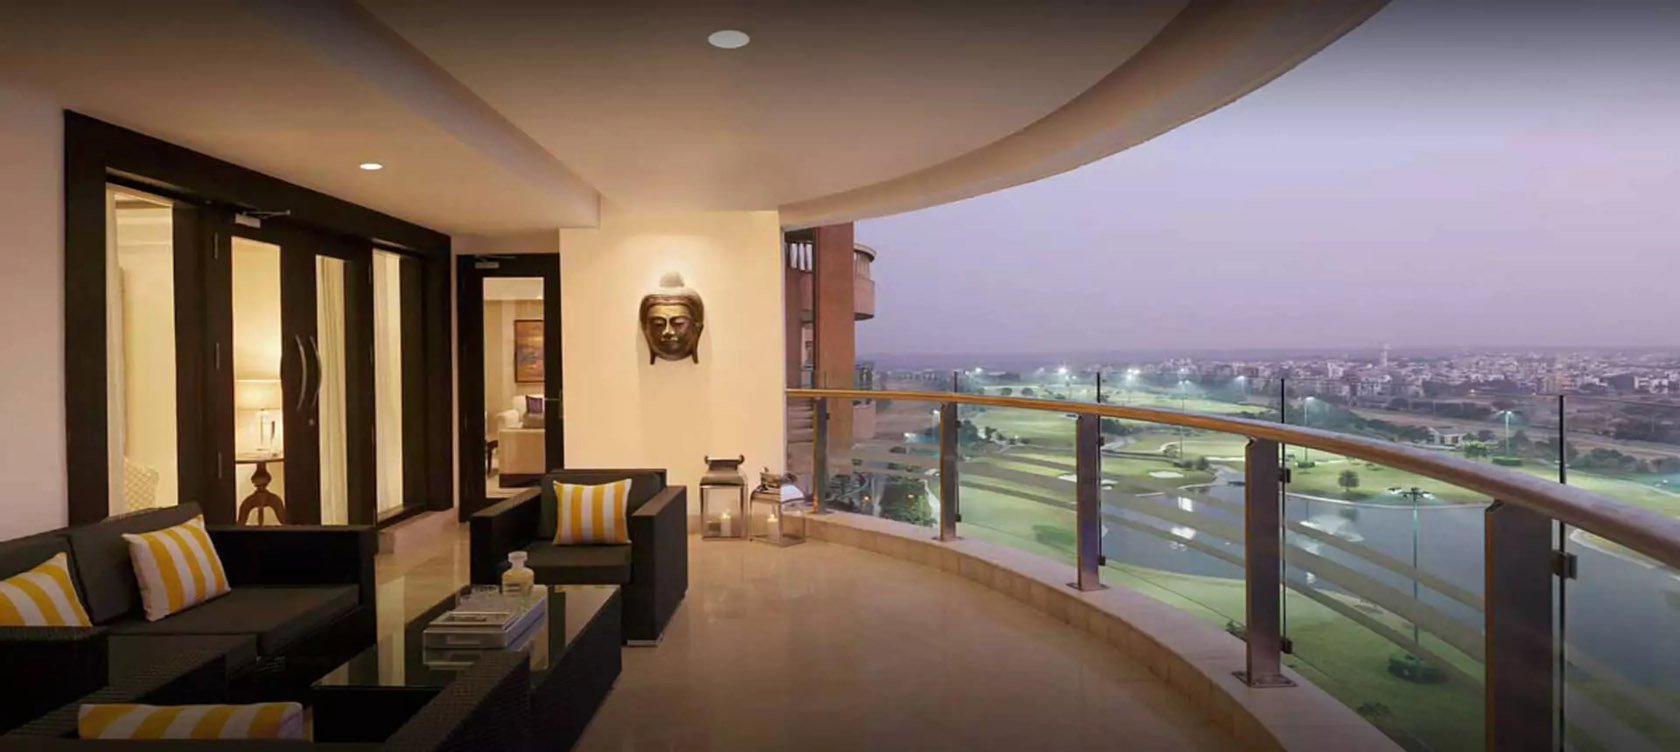 Ambience Caitriona in DLF Phase 3 Gurgaon